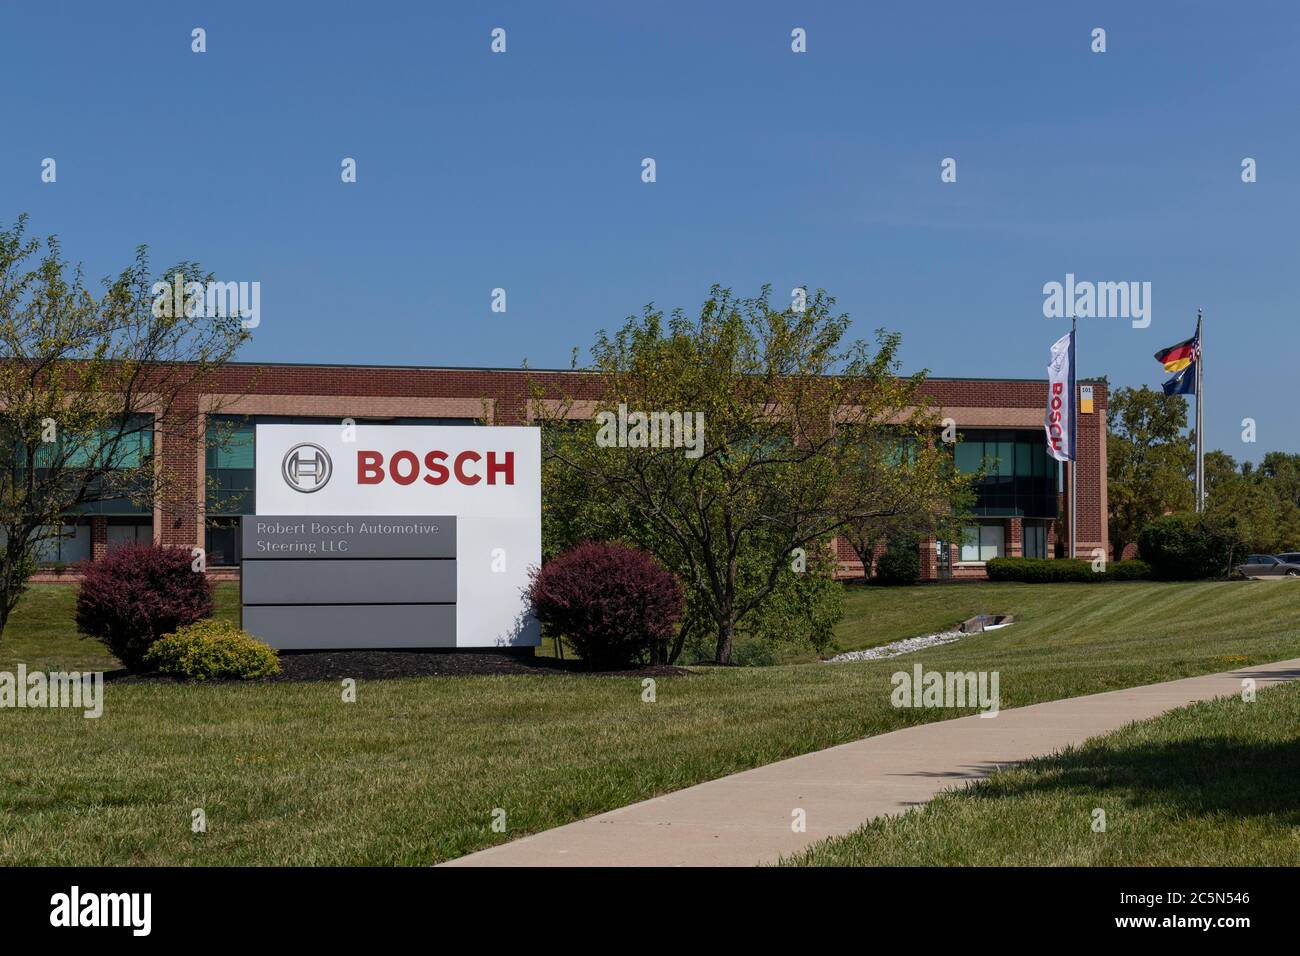 Florence - Circa July 2020: Robert Bosch Automotive Steering headquarters. Robert Bosch develops and produces steering systems for passenger cars, com Stock Photo